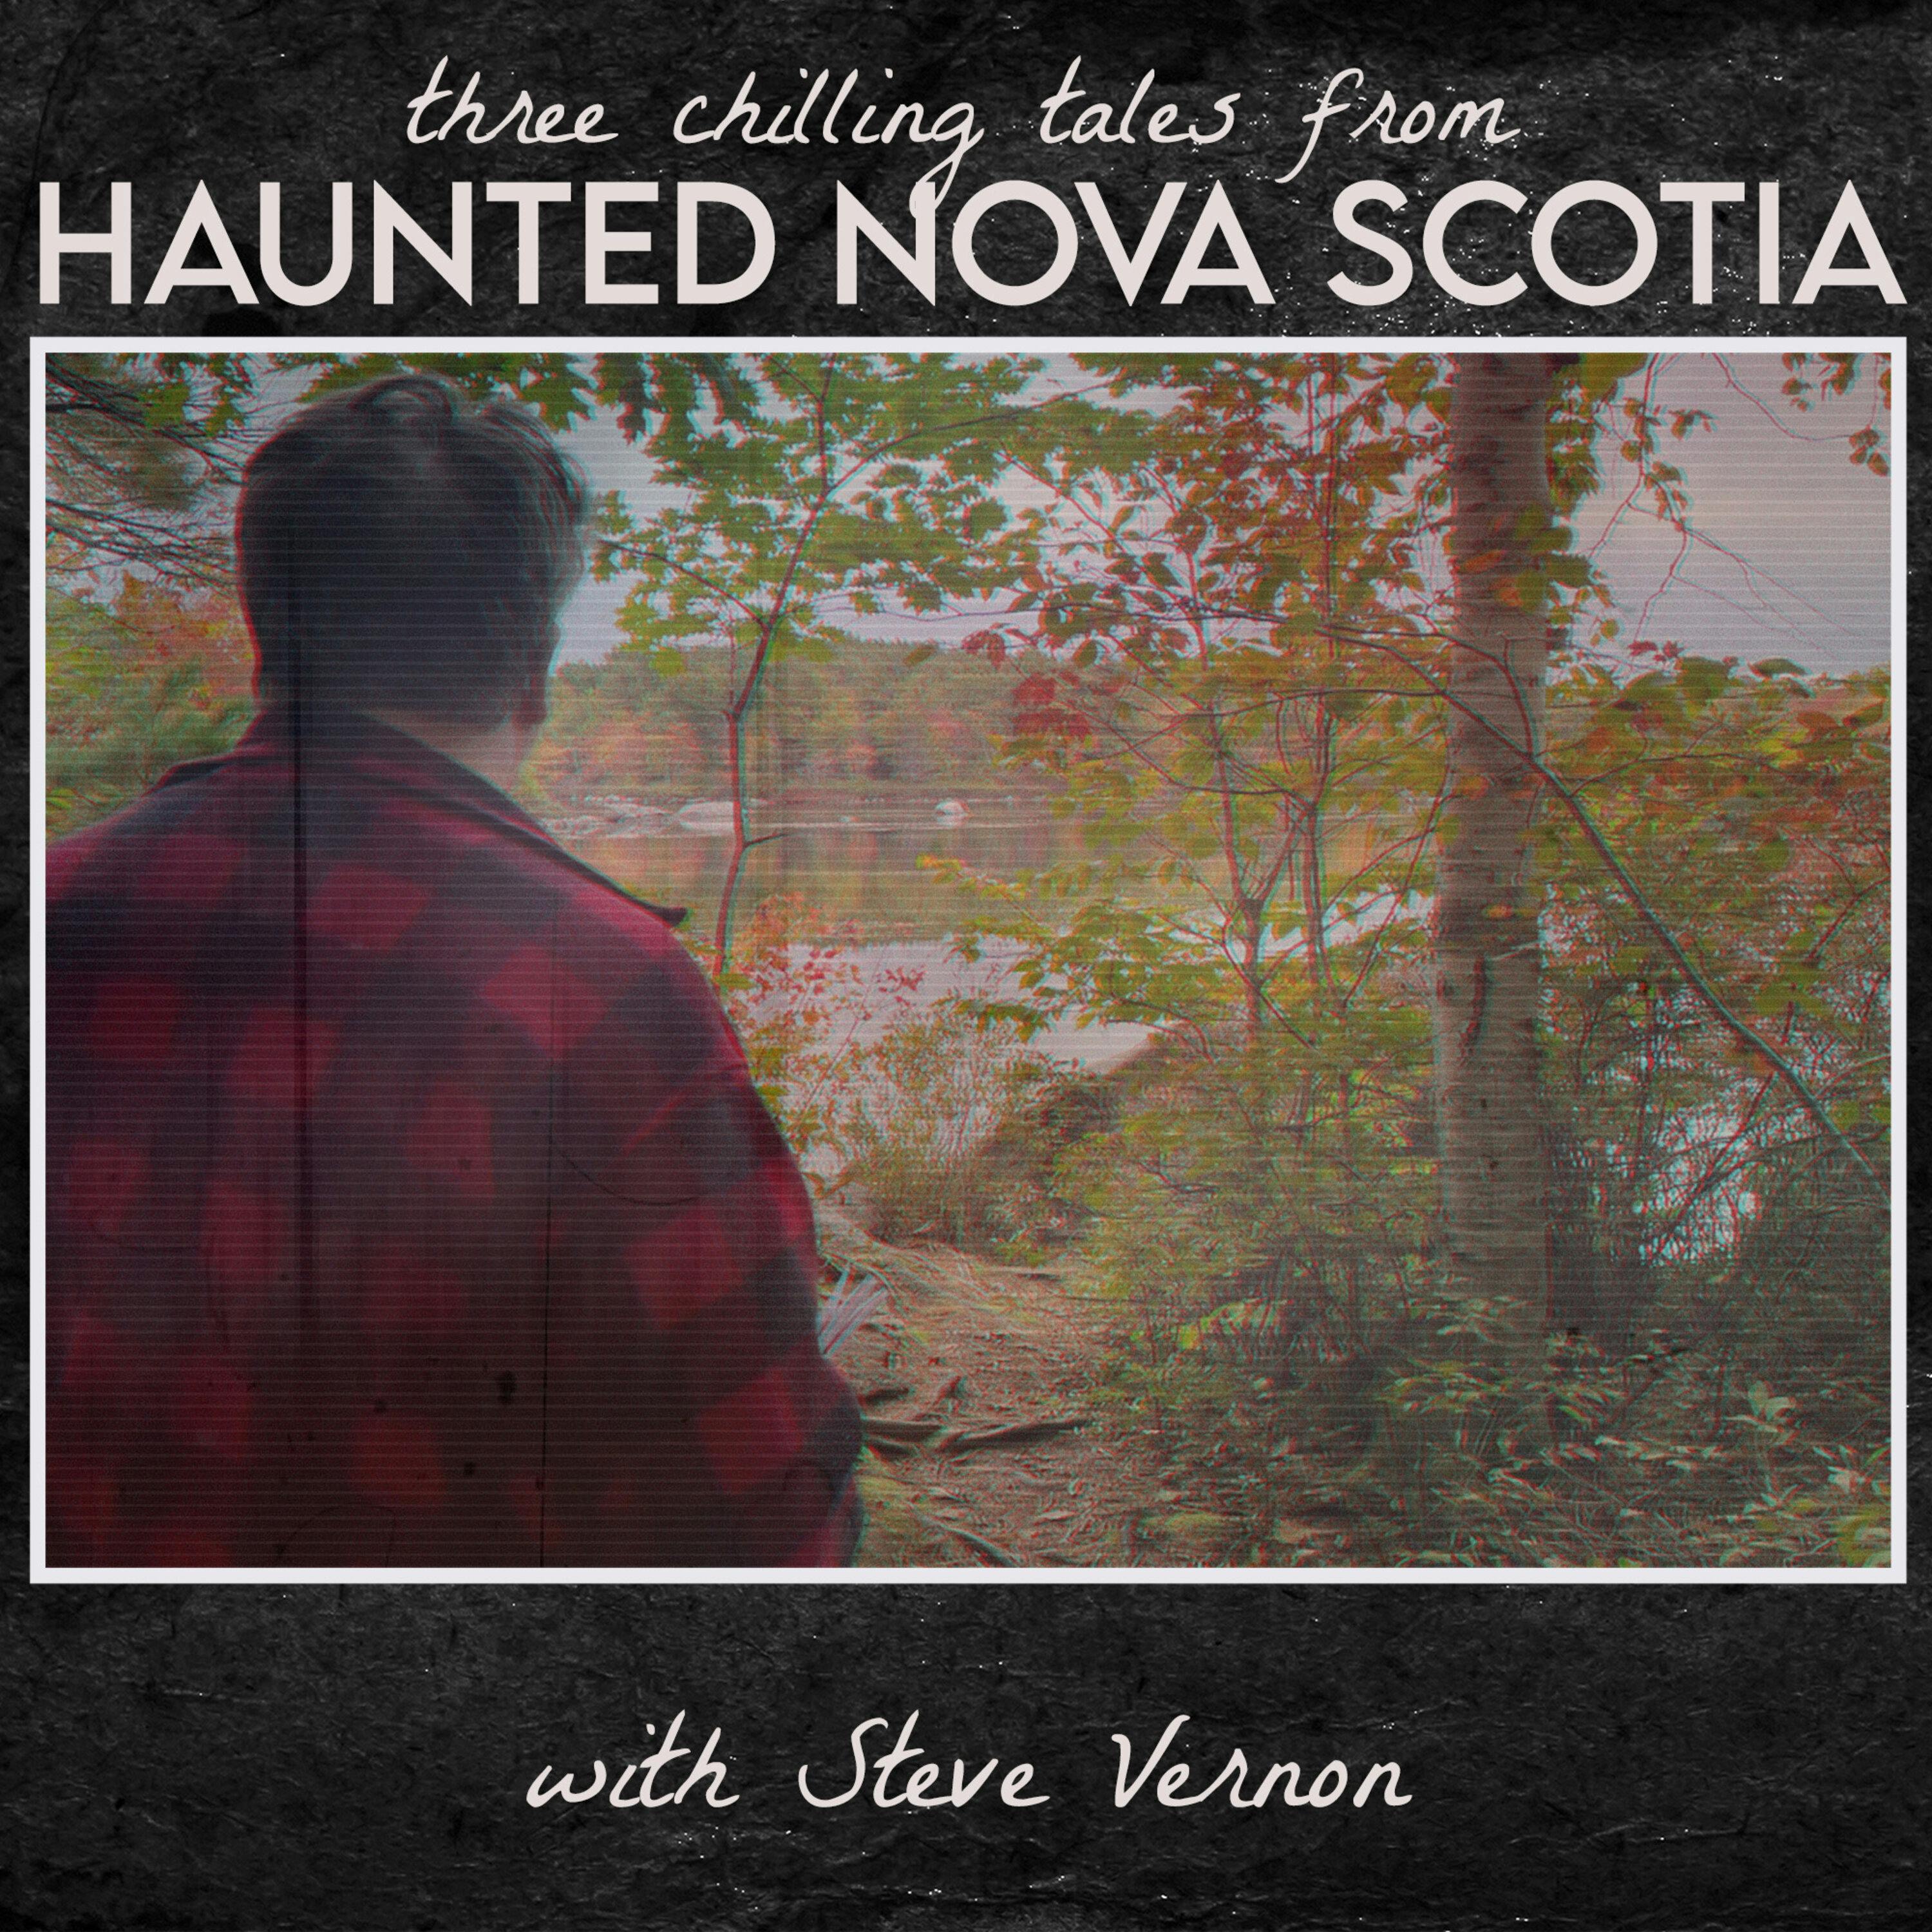 Three More Tales from Haunted Nova Scotia - with Steve Vernon